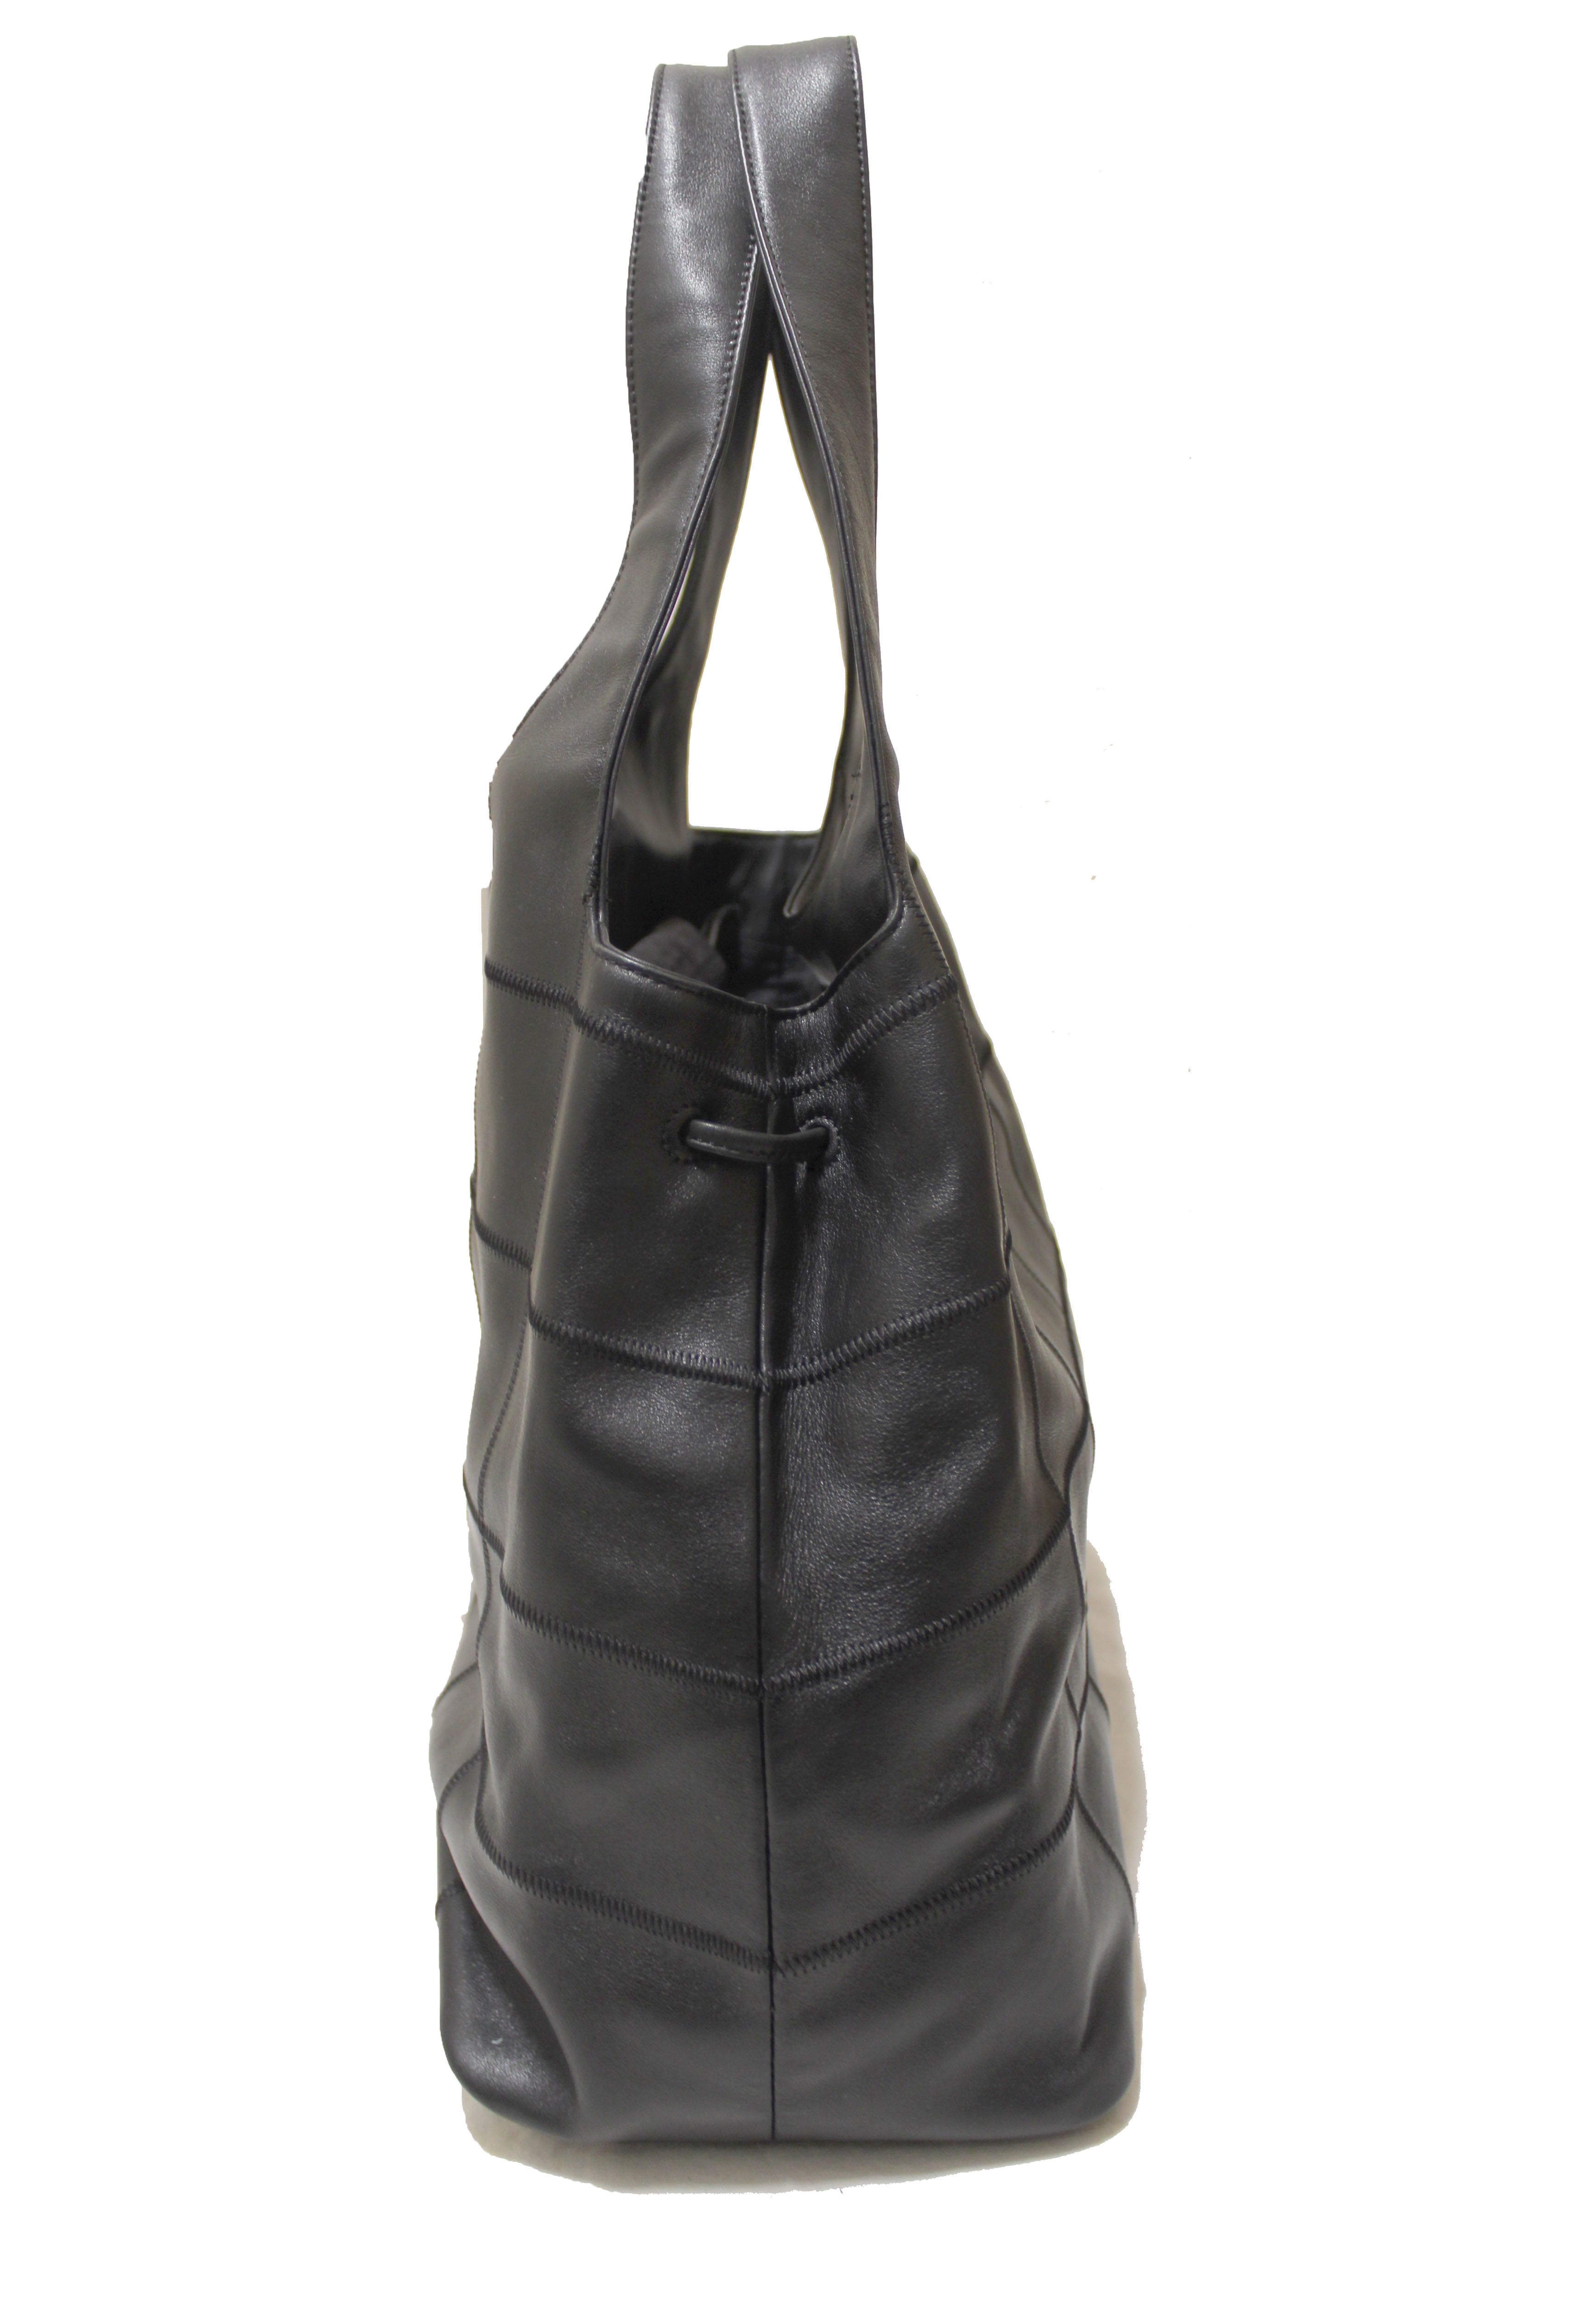 Chanel Patent Leather Bucket Bag